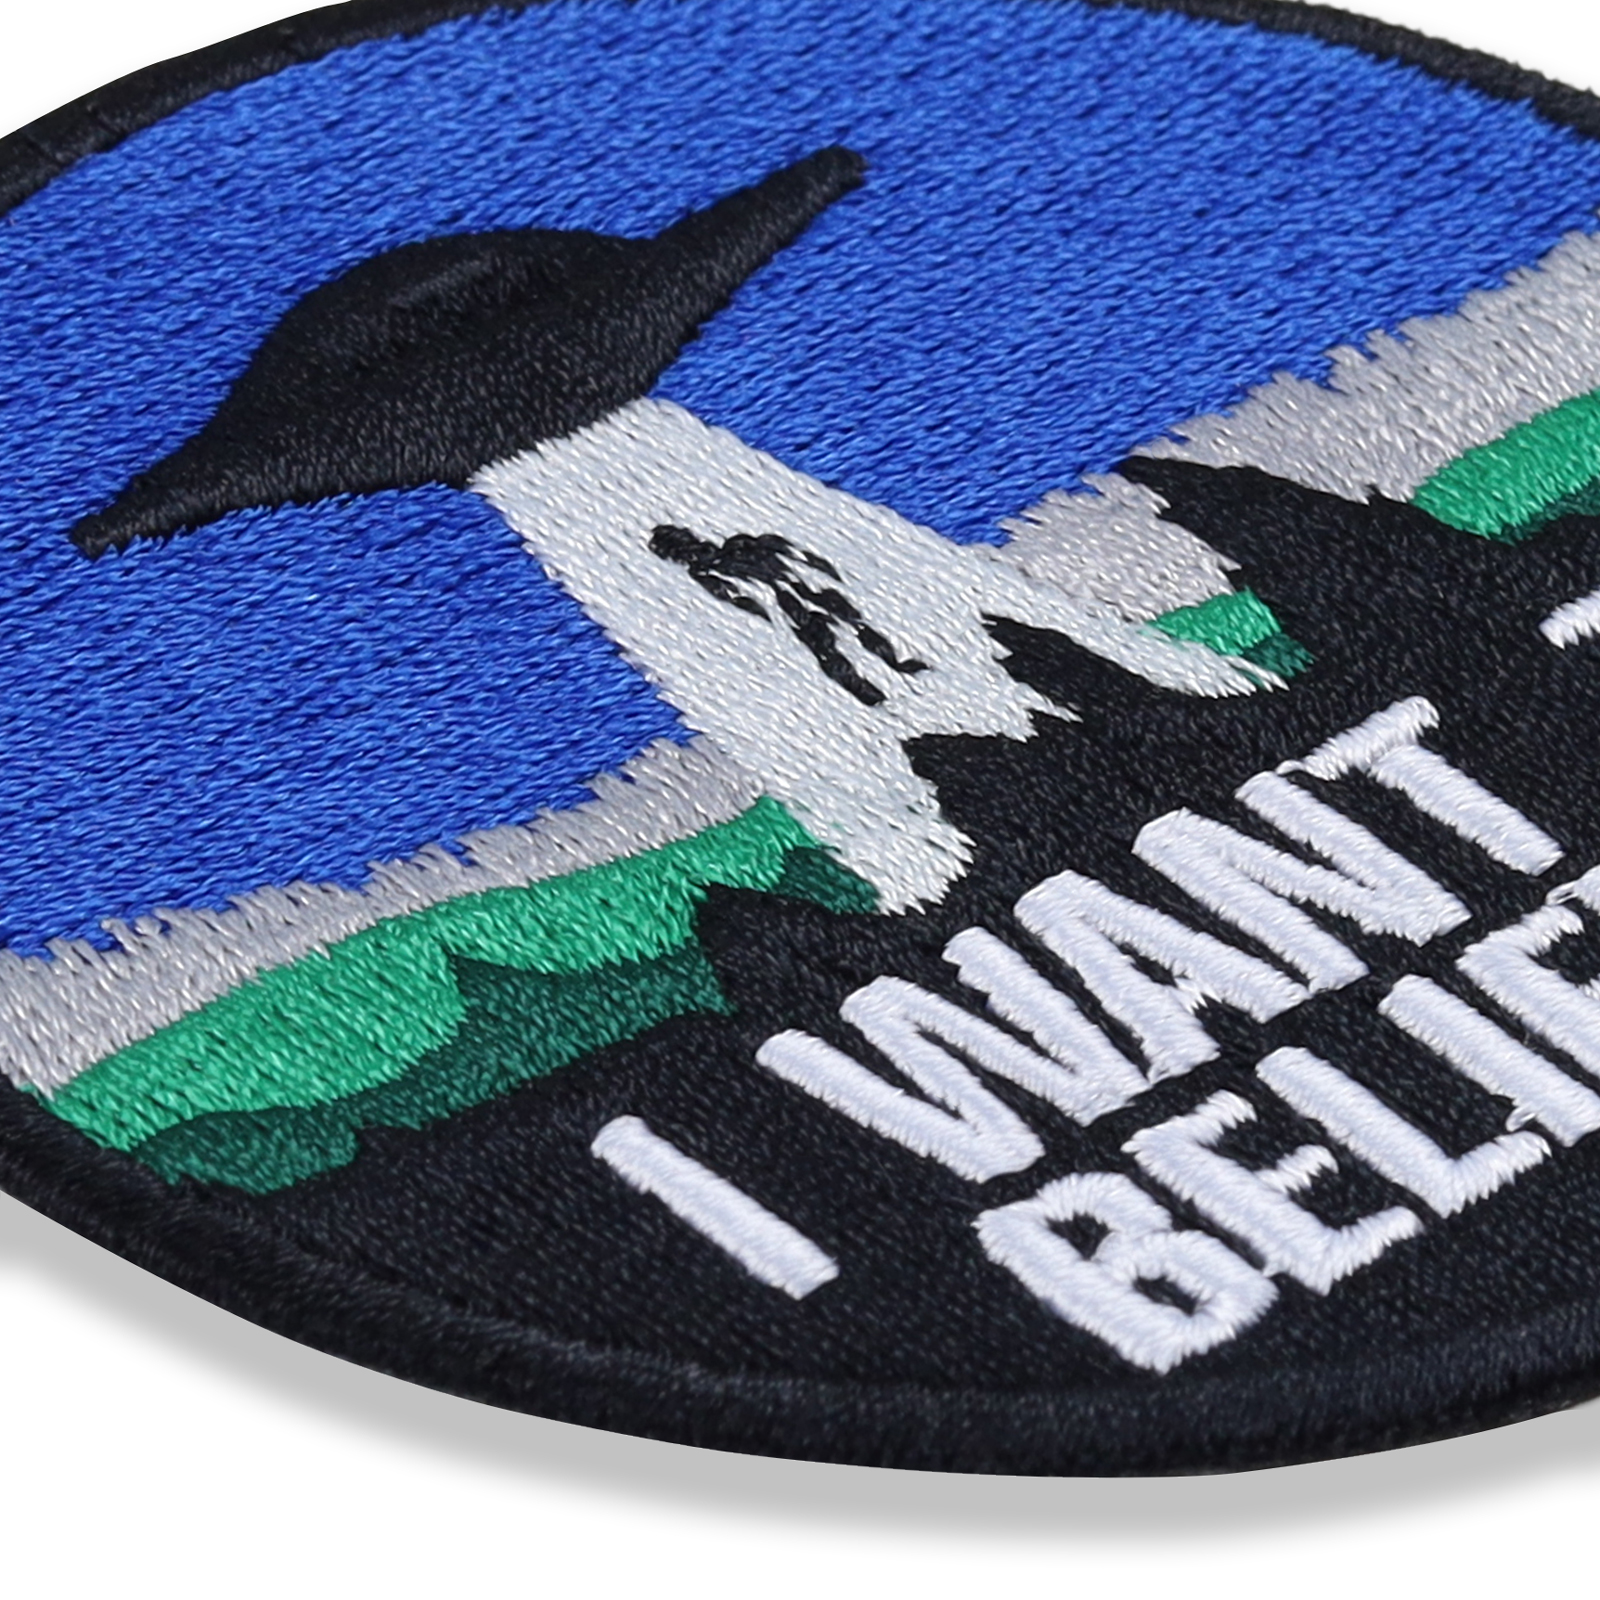 I want to believe - Patch